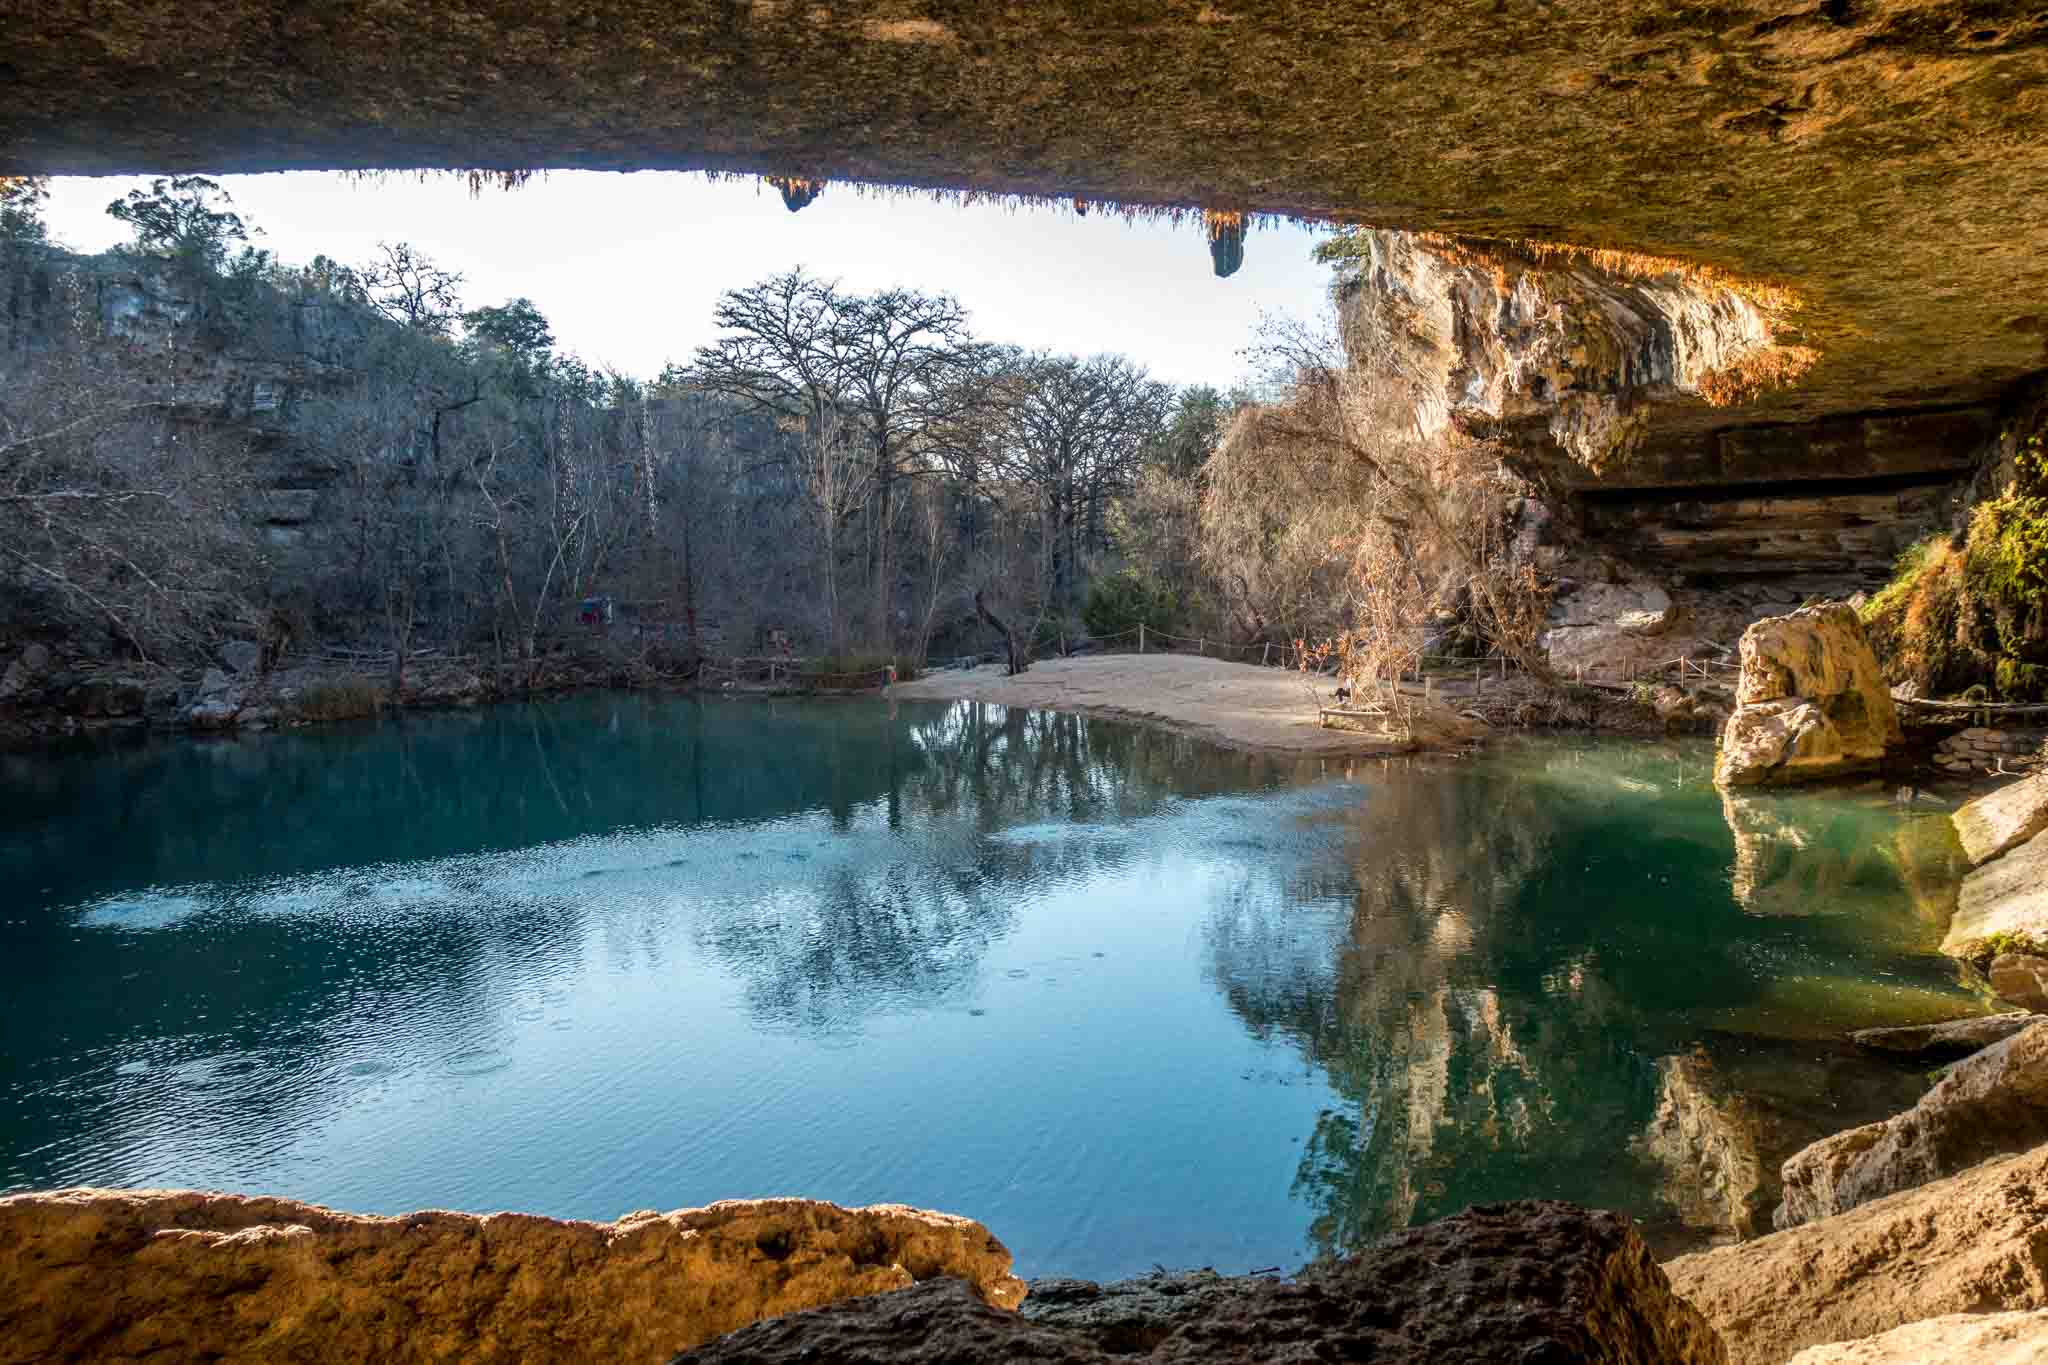 Hamilton Pool, a swimming hole surrounded by trees and a limestone wall